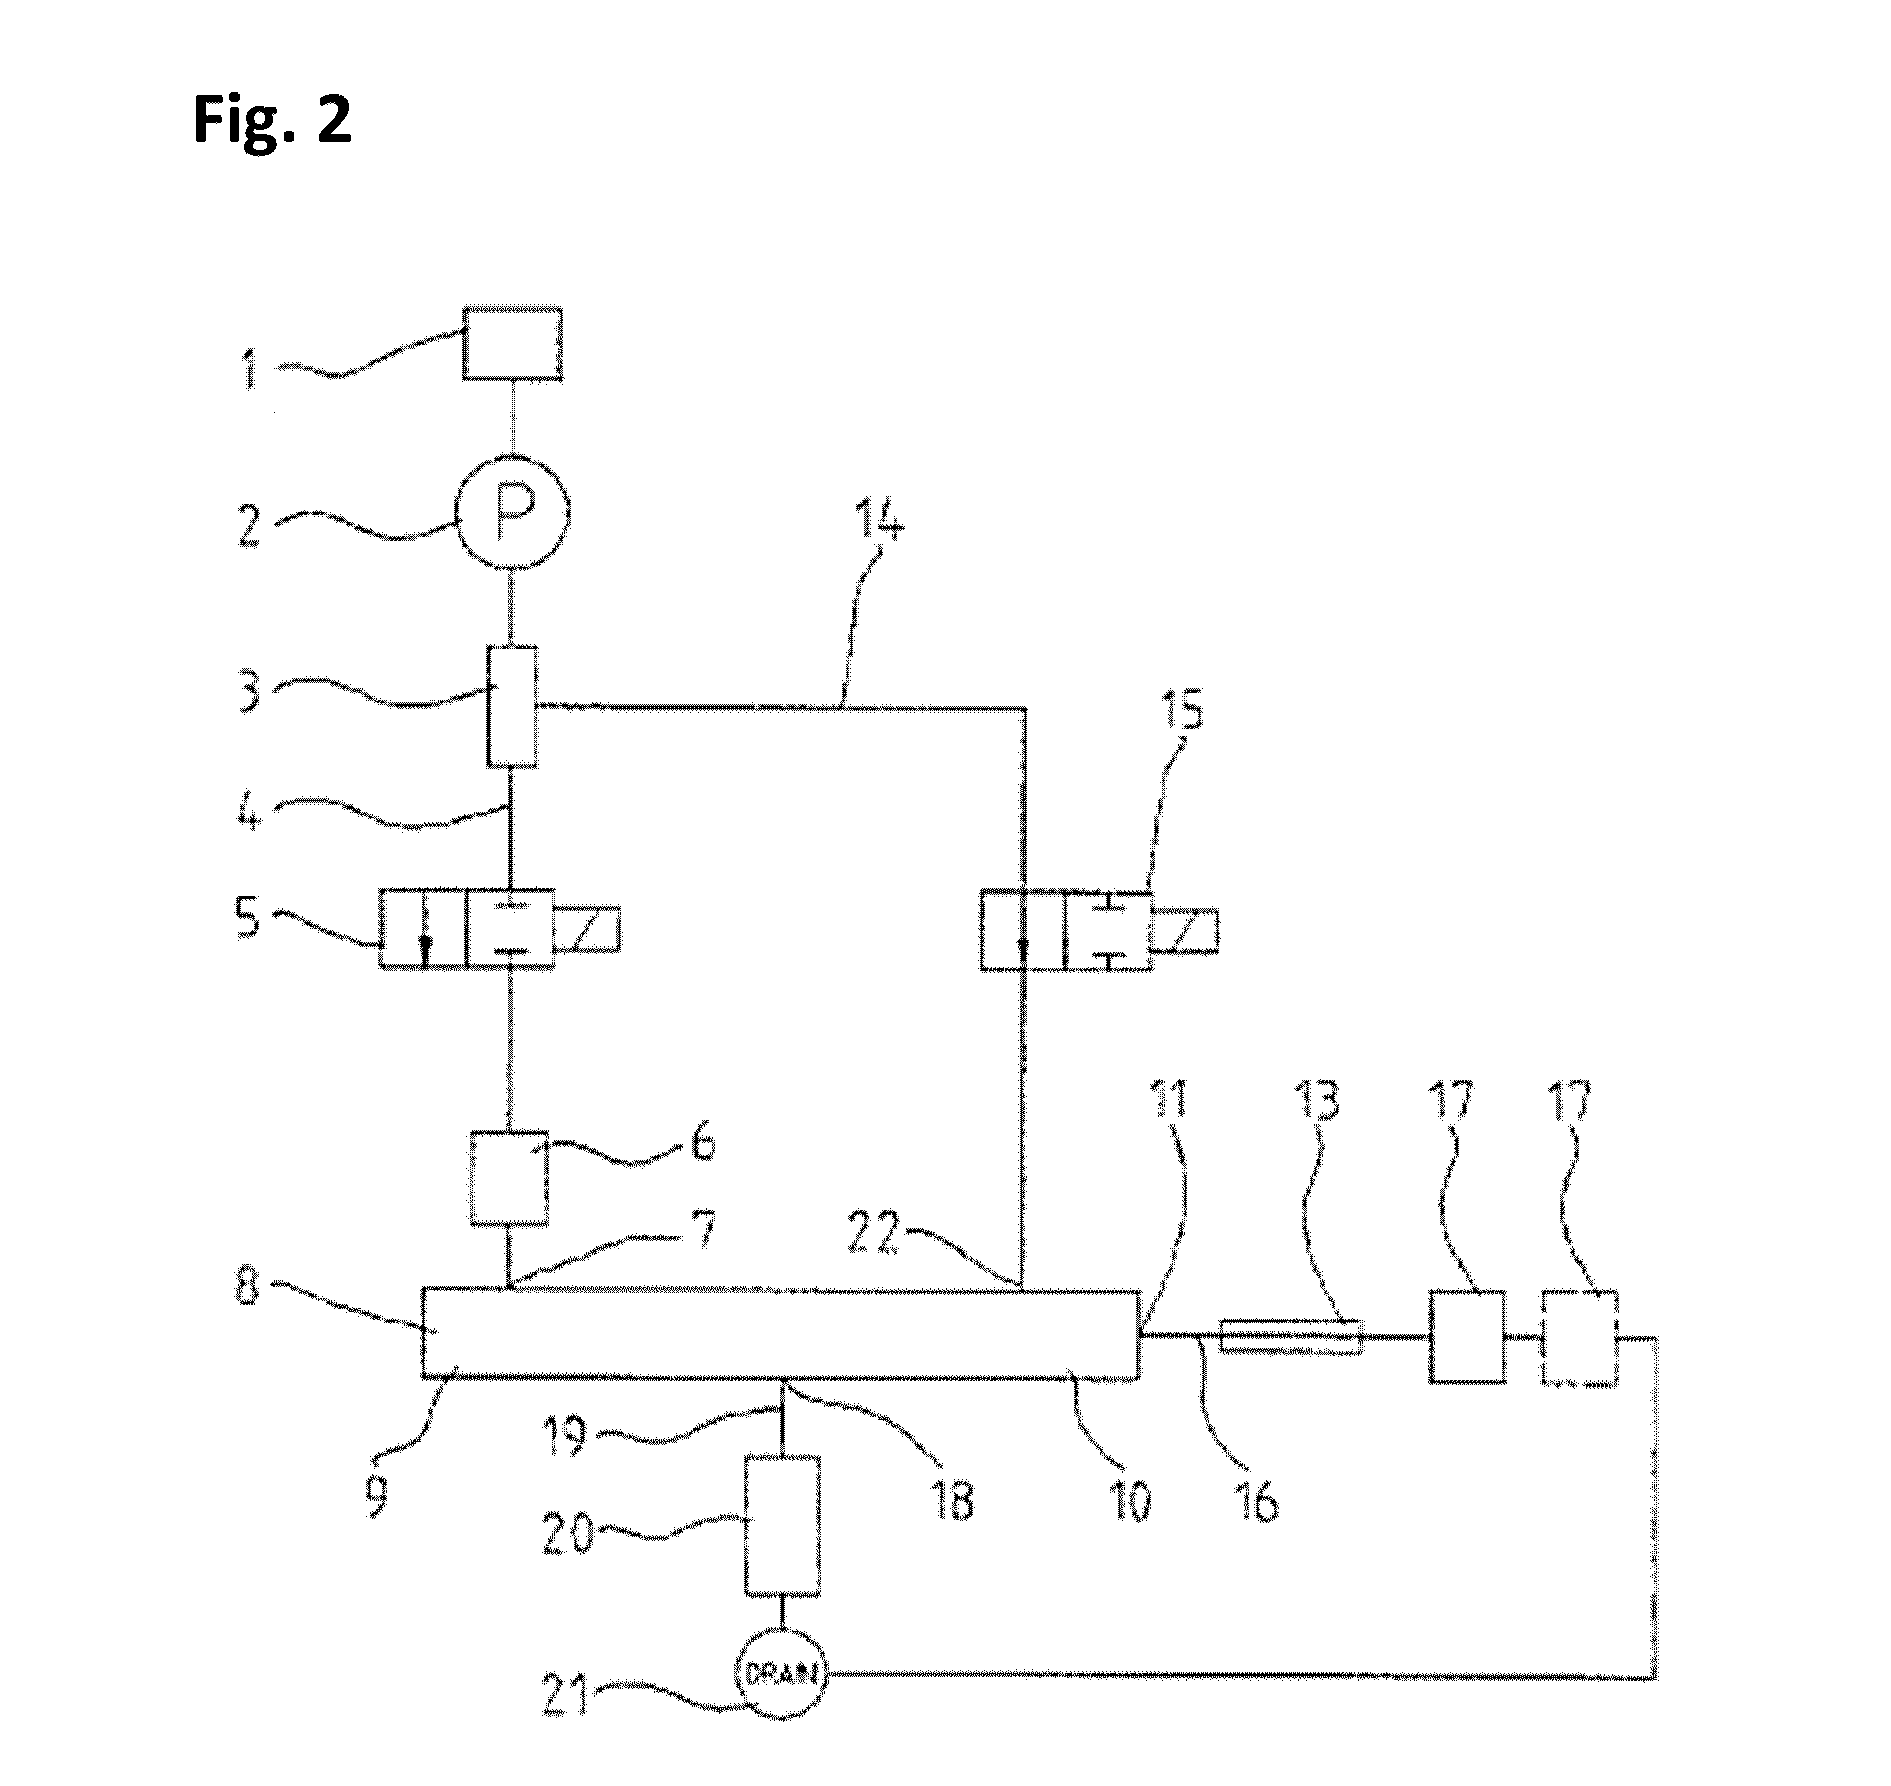 Apparatus for Field-Flow Fractionation